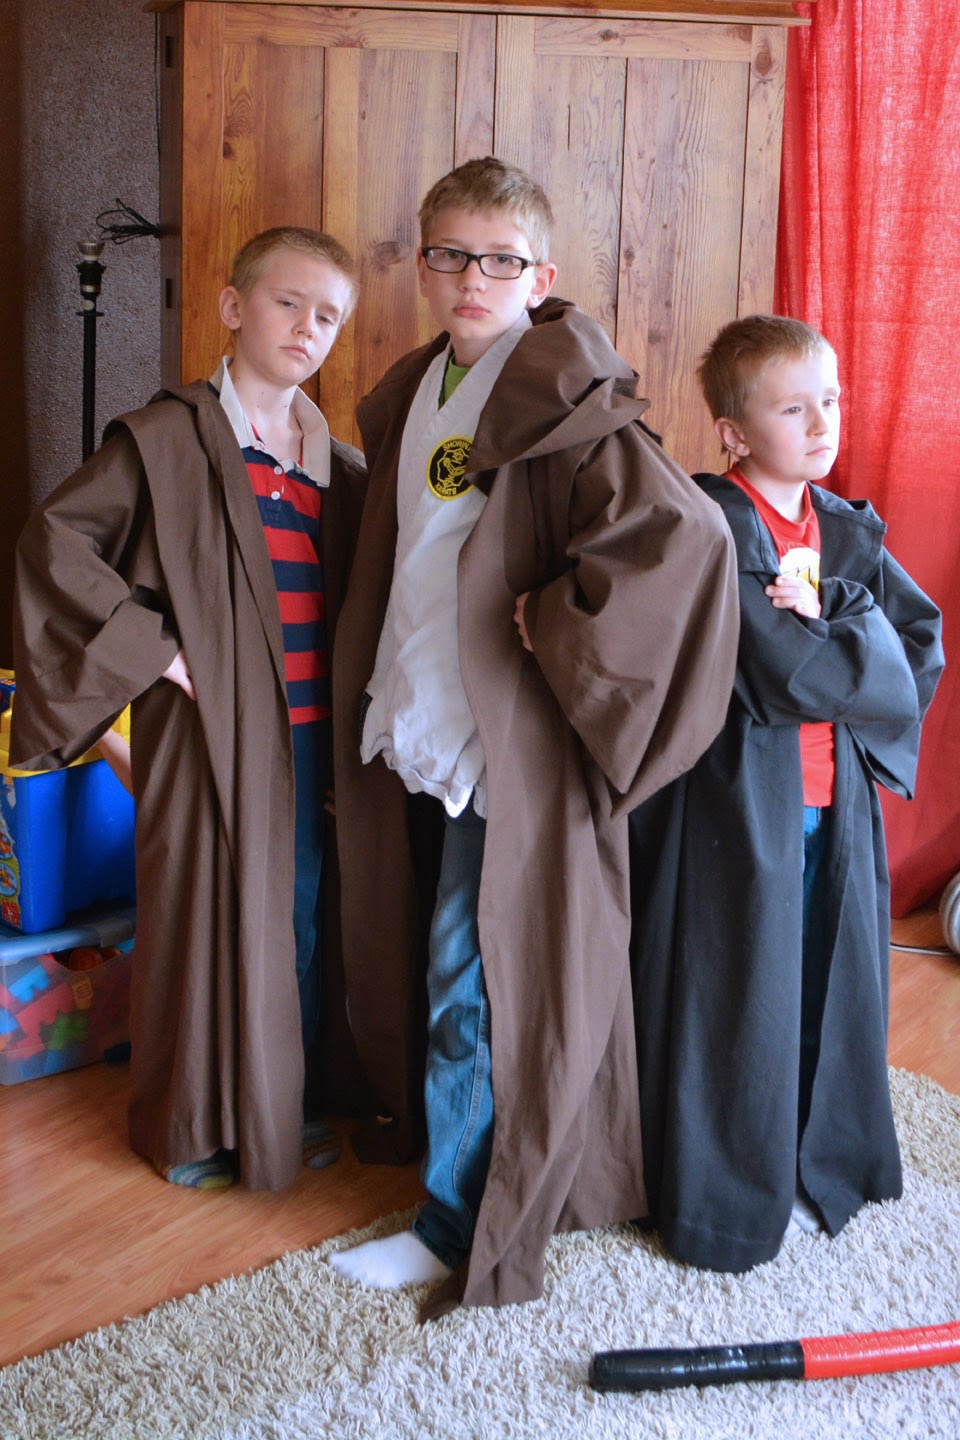 Star Wars Jedi and Sith robes on boys